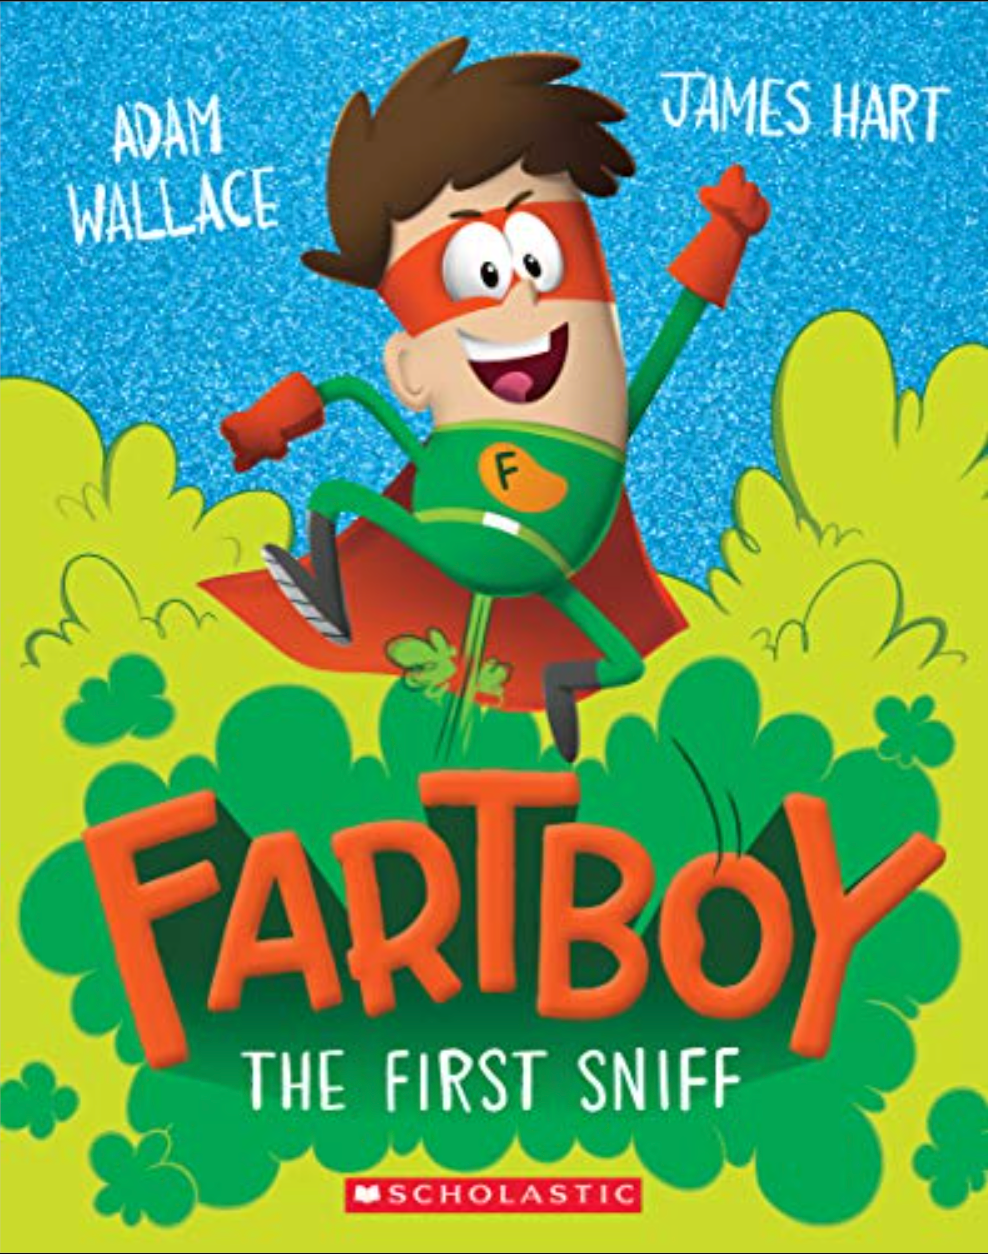 Fart Boy by Adam Wallace and James Hart